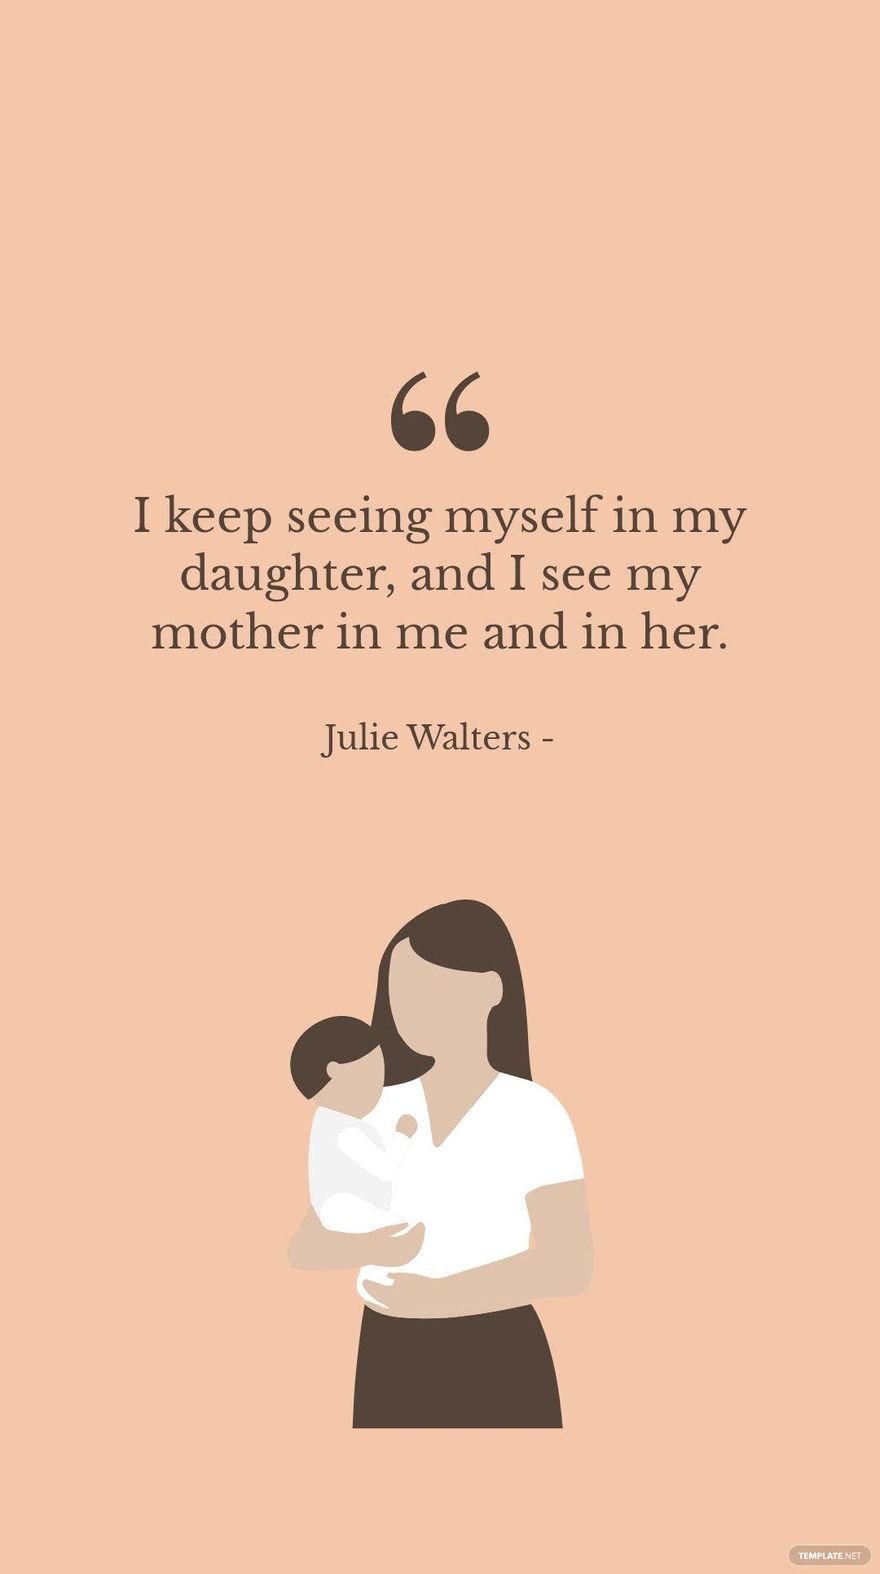 Julie Walters - I keep seeing myself in my daughter, and I see my mother in me and in her.